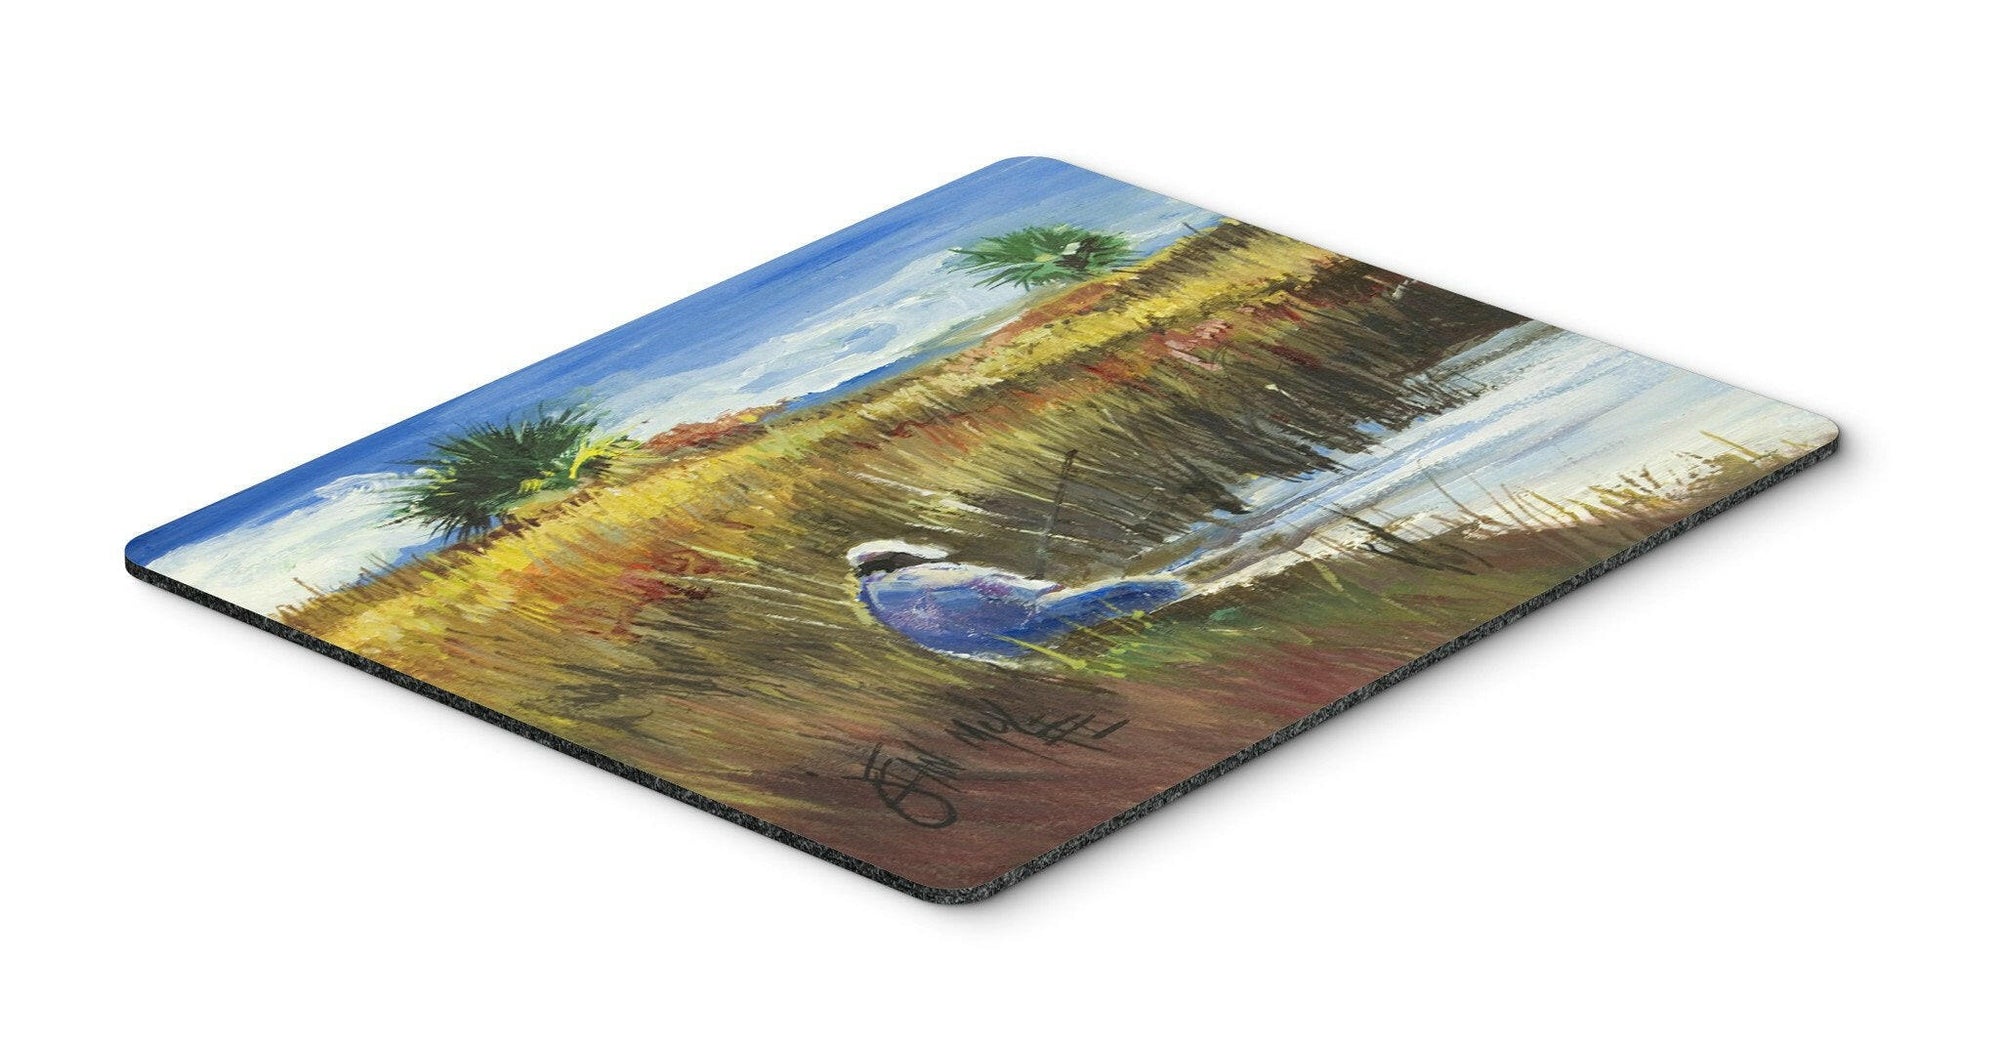 Fisherman on the Bank Mouse Pad, Hot Pad or Trivet JMK1125MP by Caroline's Treasures